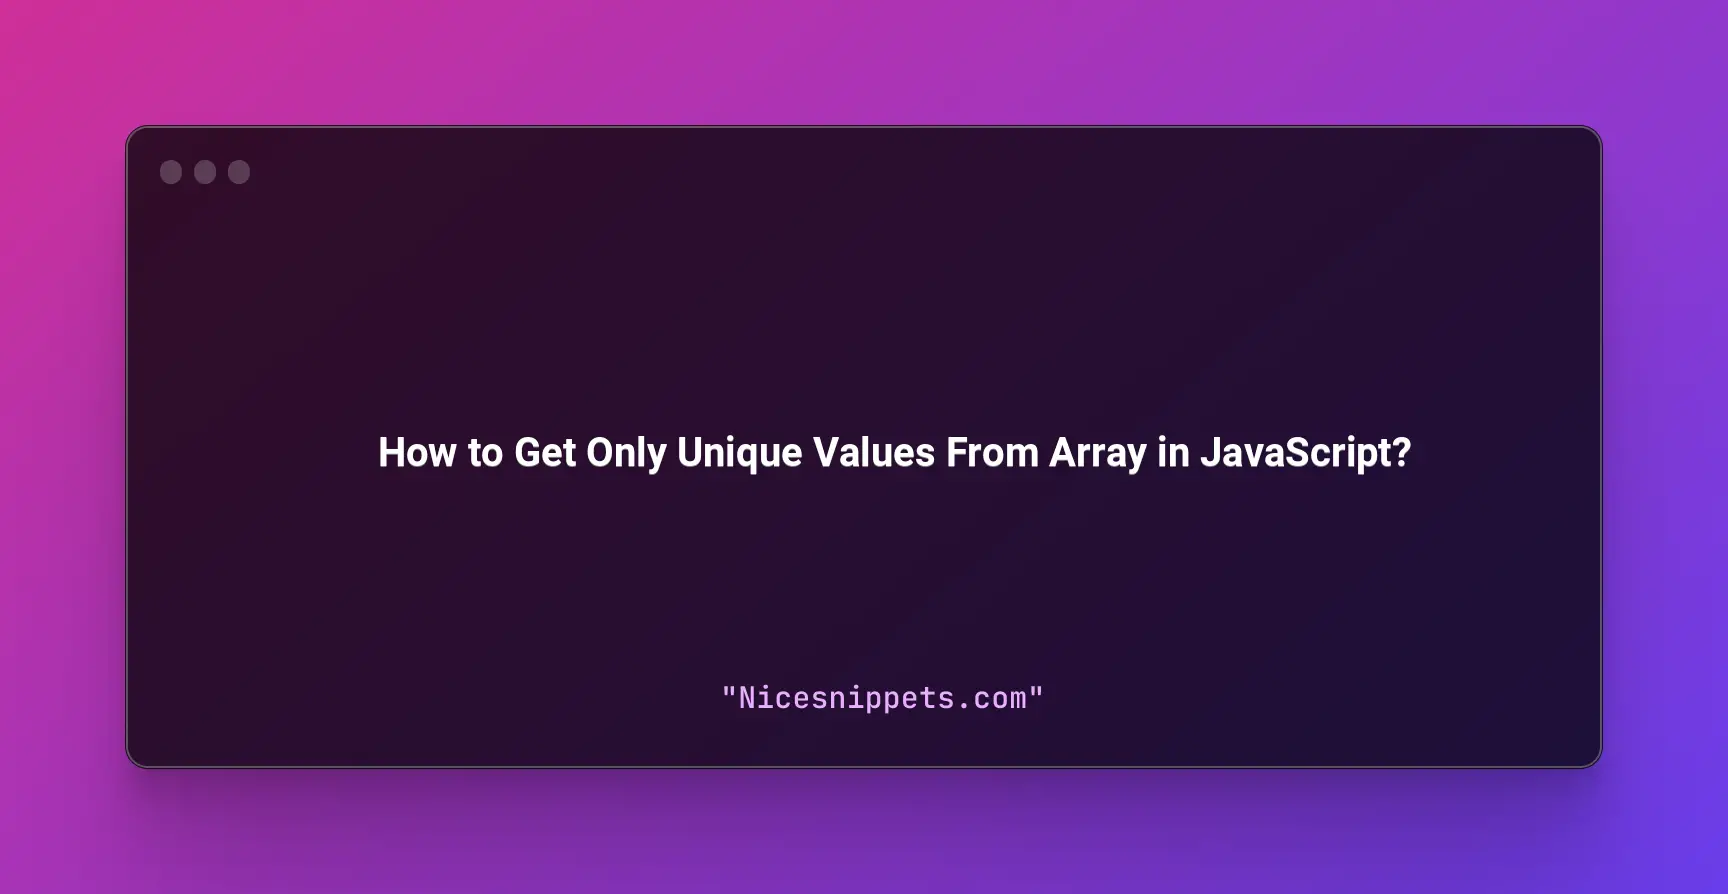 How to Get Only Unique Values From Array in JavaScript?